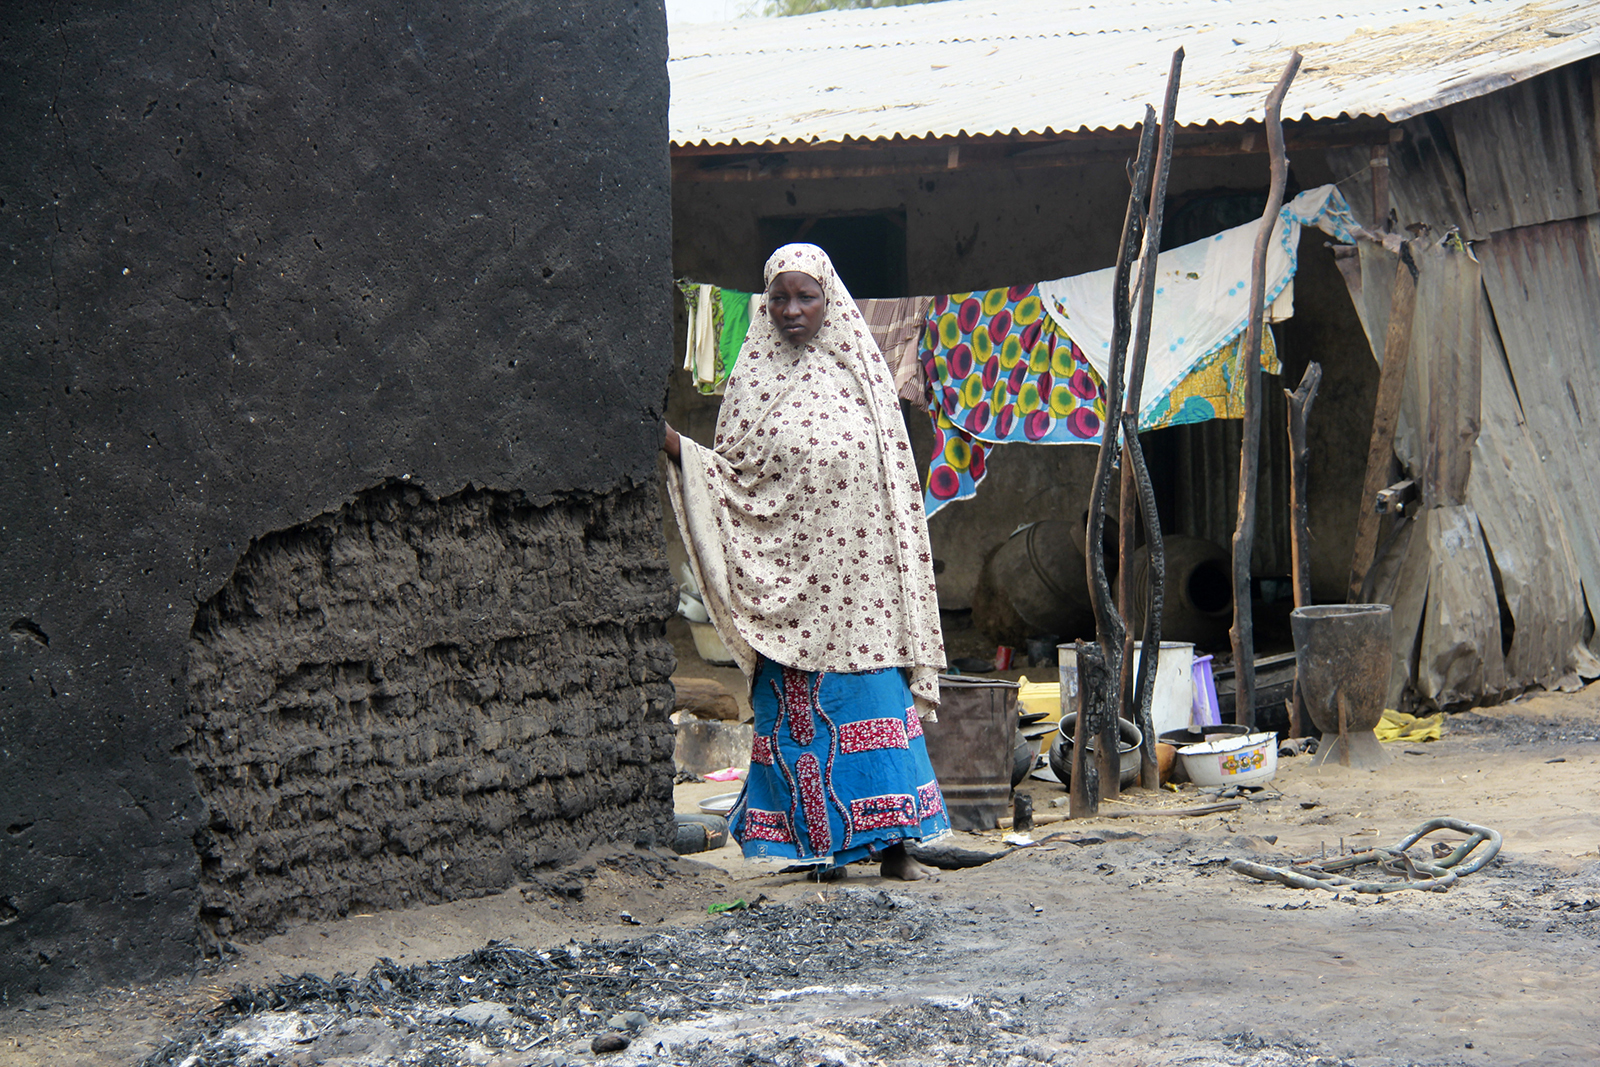 Borno Boko Haram Featured A woman stands next to a burnt house in the aftermath of what Nigerian authorities said was heavy fighting between security forces and Islamist militants in Baga